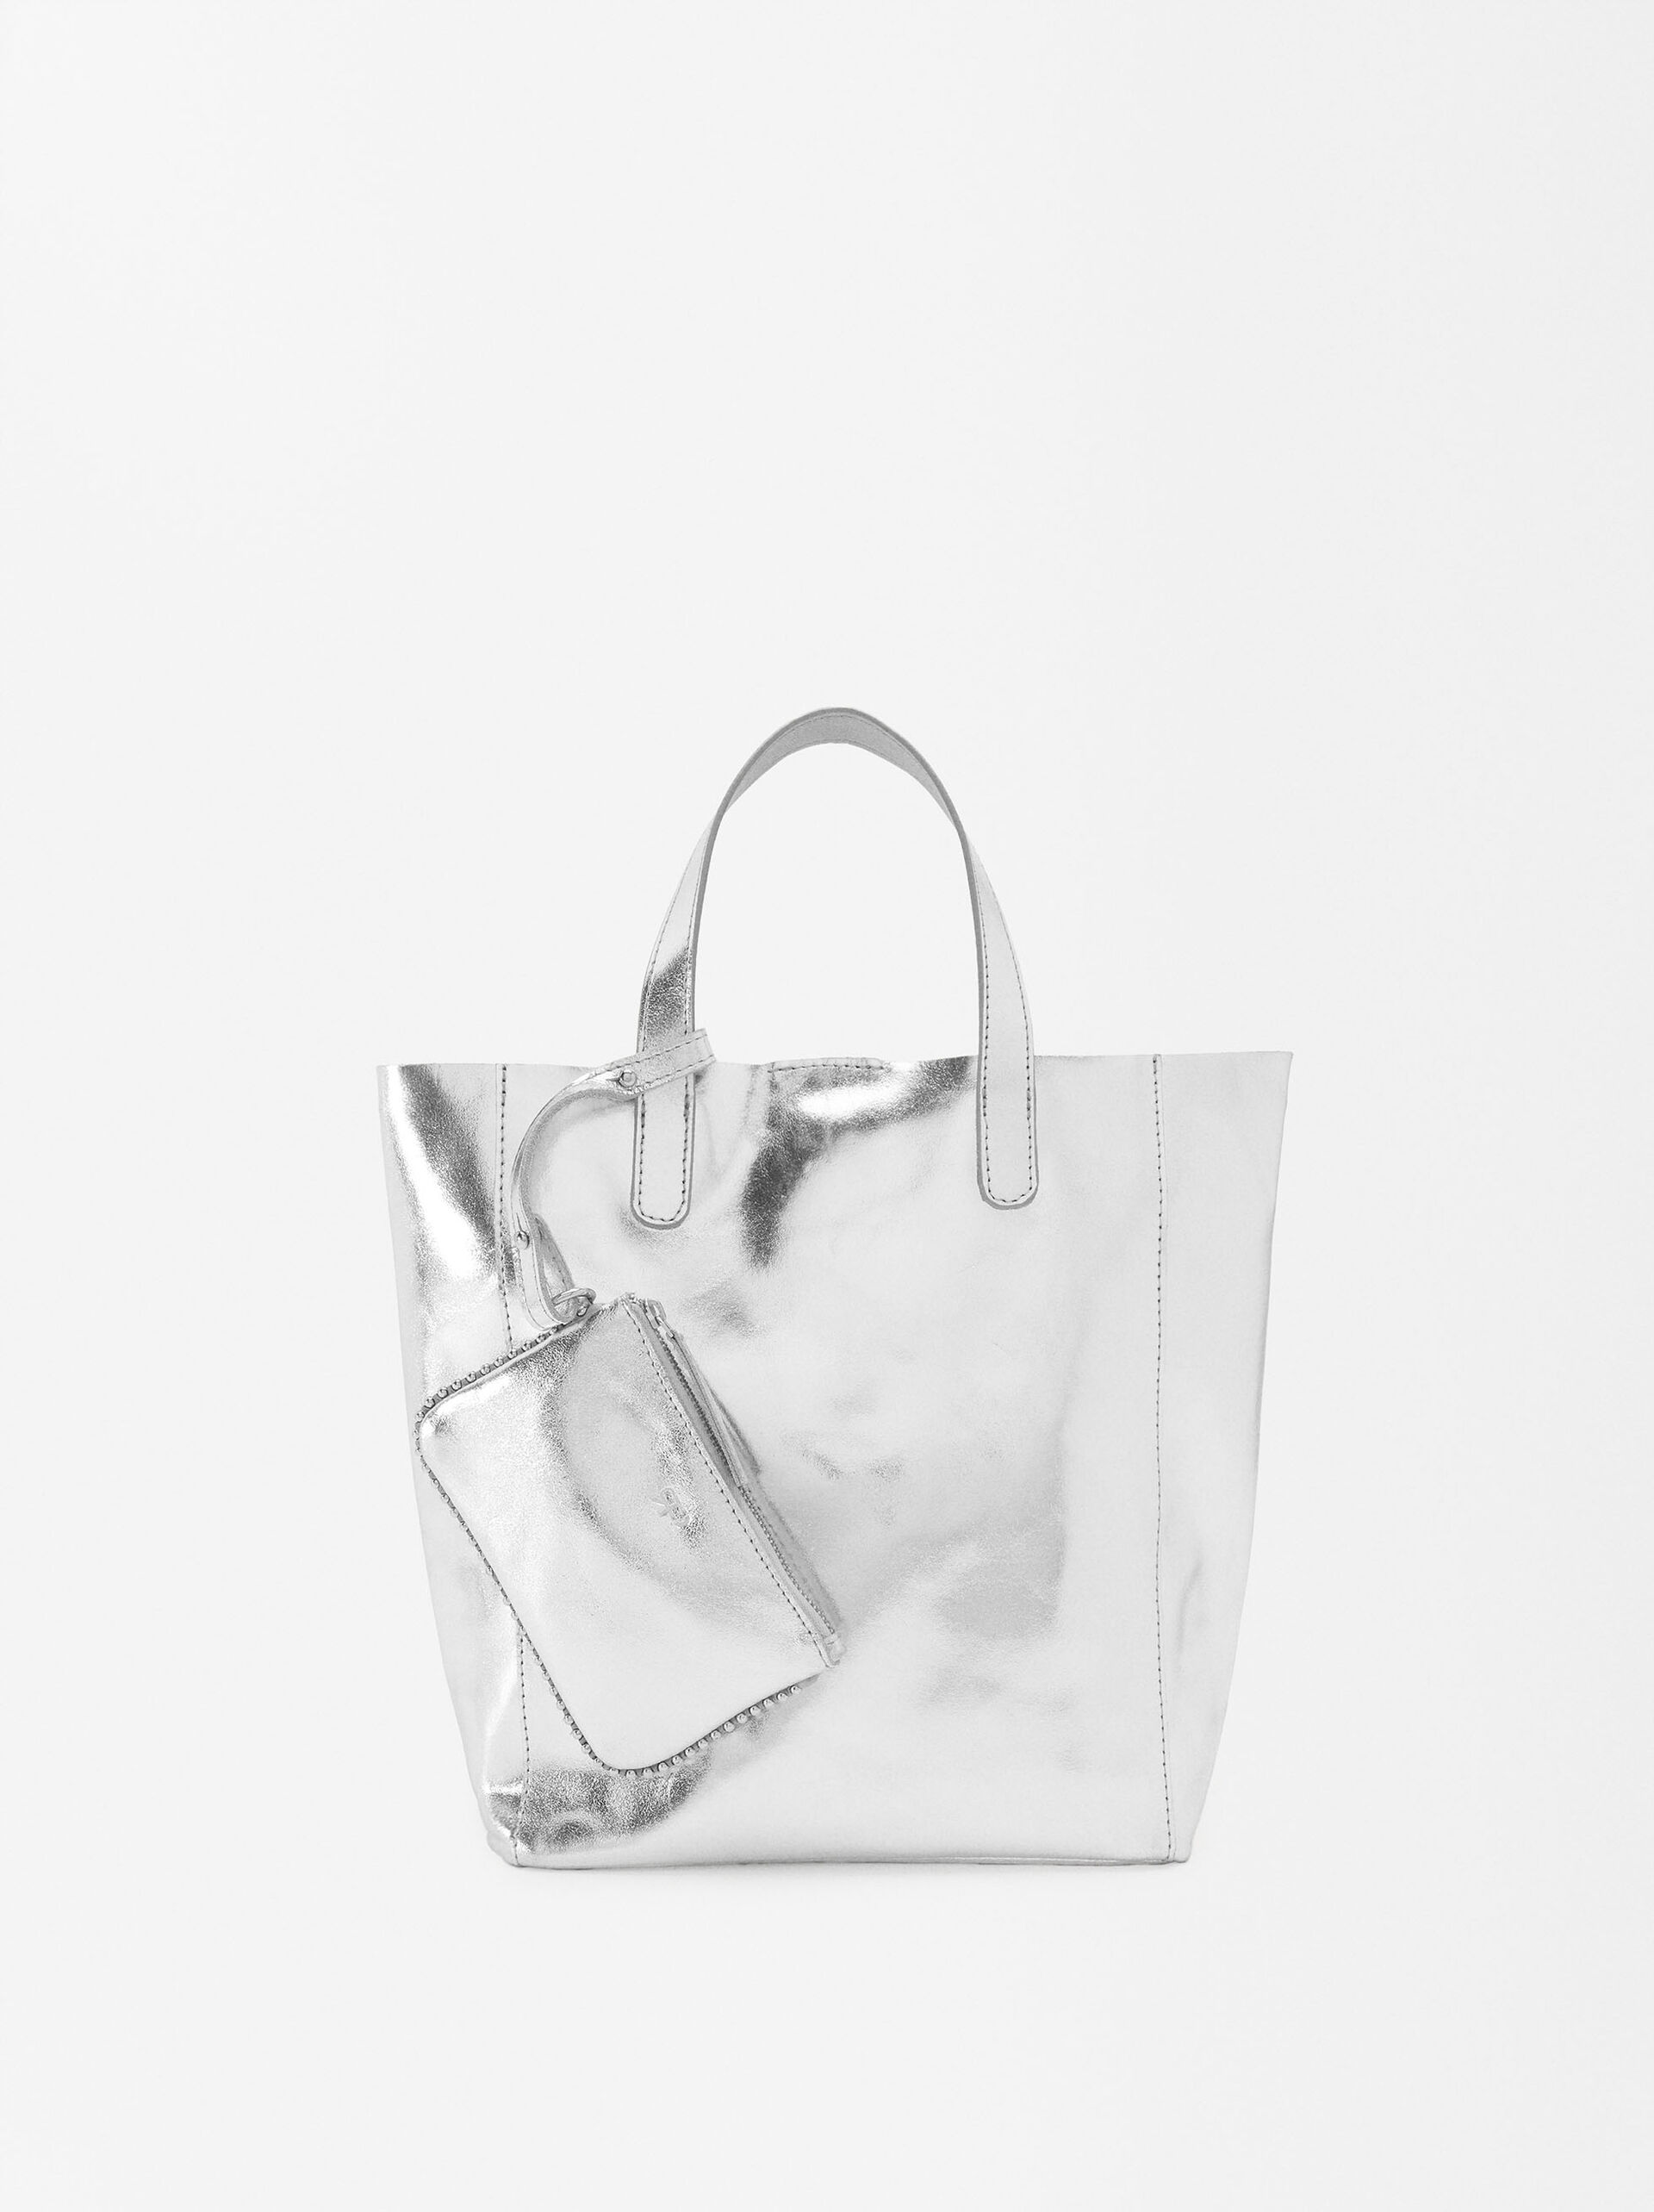 Borsa Shopper In Pelle Metallizzata - Limited Edition image number 2.0